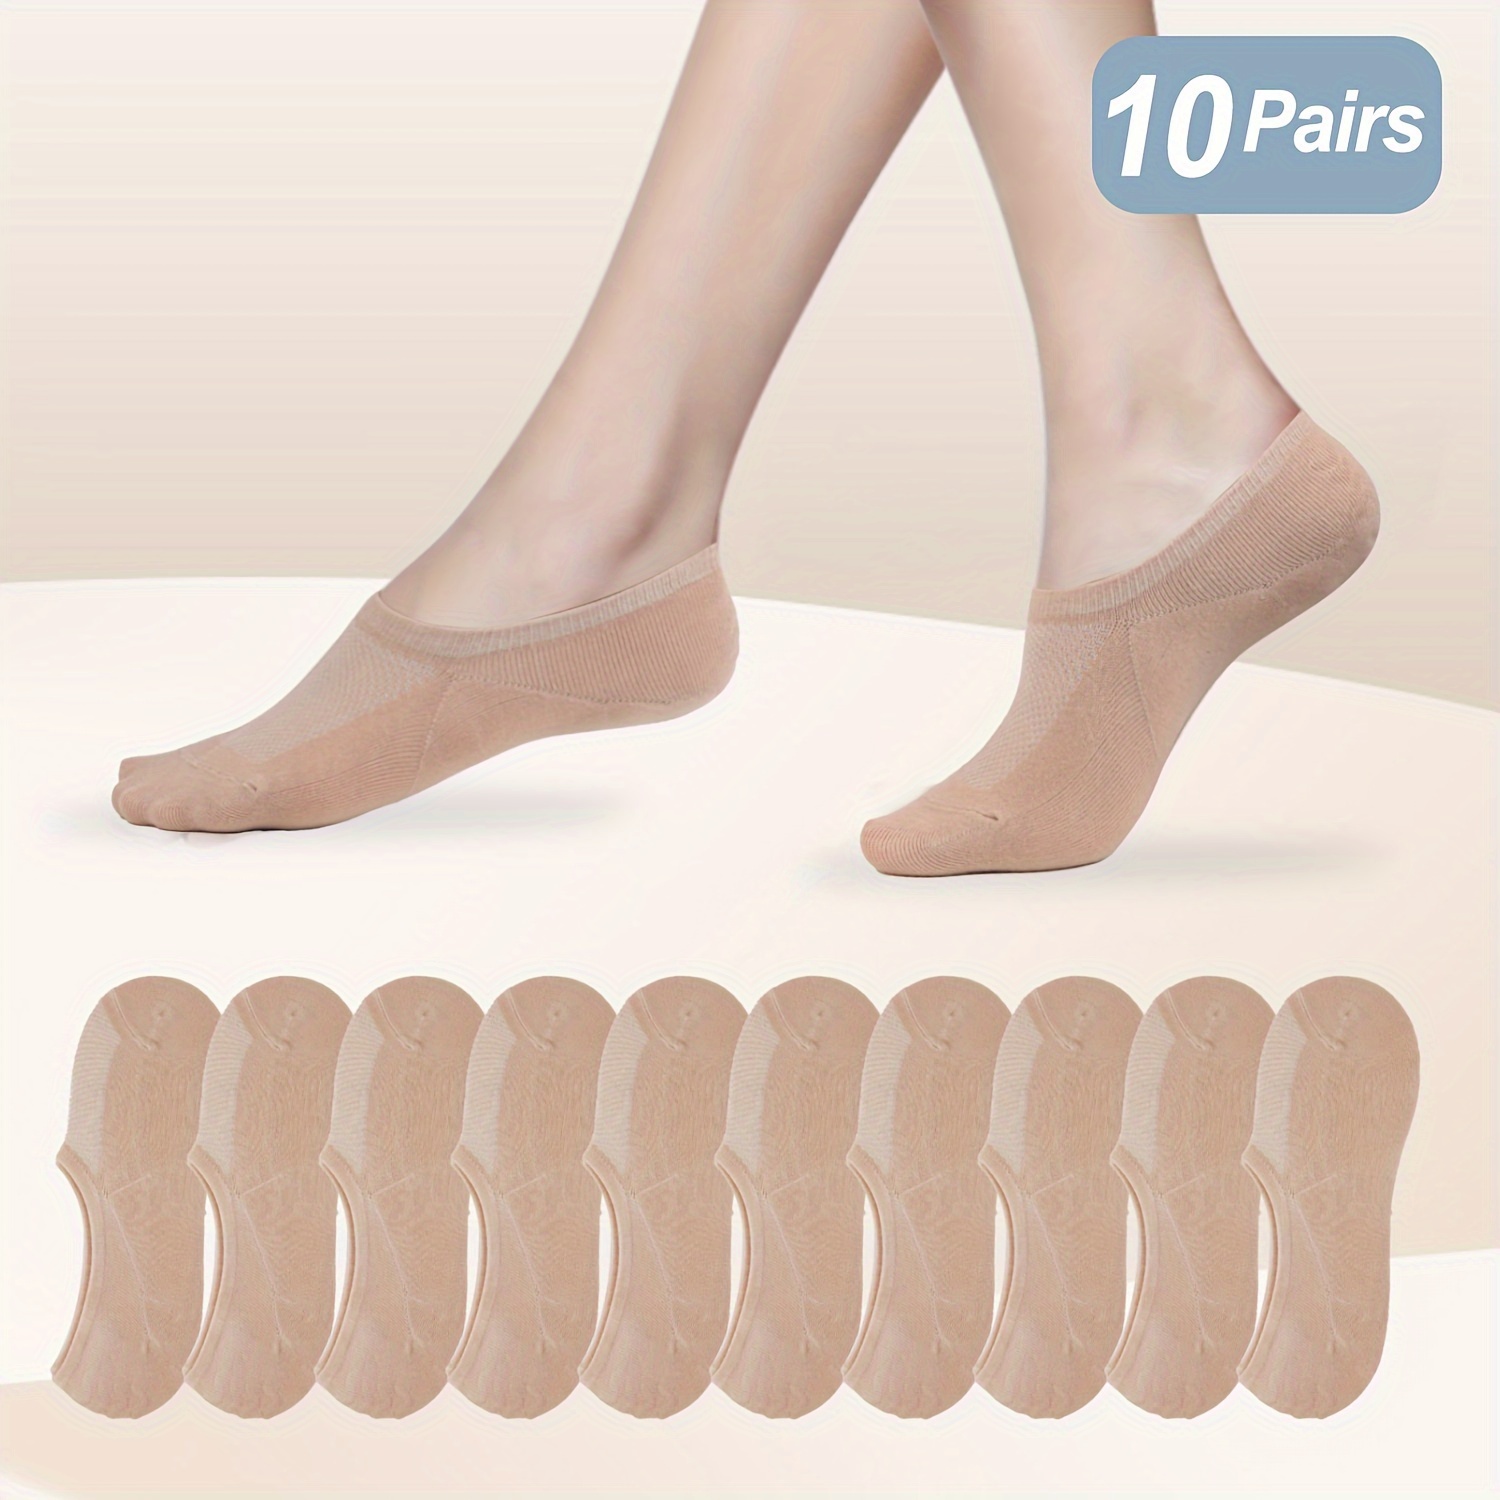 

12 Pairs Women's Bamboo Fiber No Show Socks, Breathable Low Cut Ankle Socks, Soft & Stretchy Comfort Fit